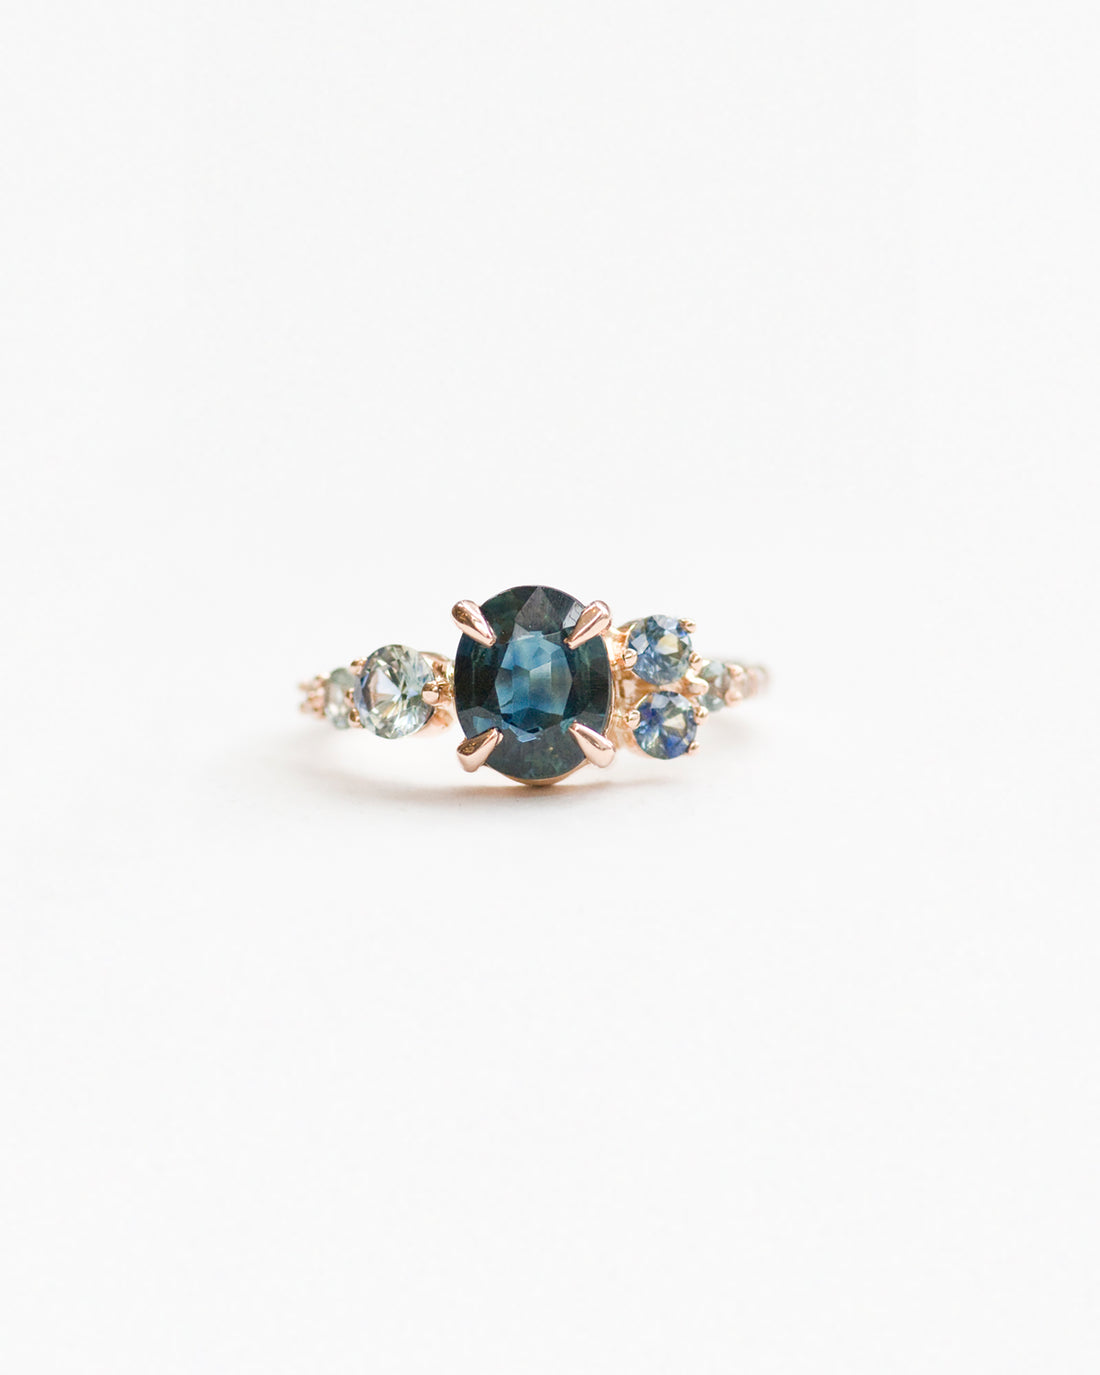 Sapphire and aqua stone cluster ring rose gold front view